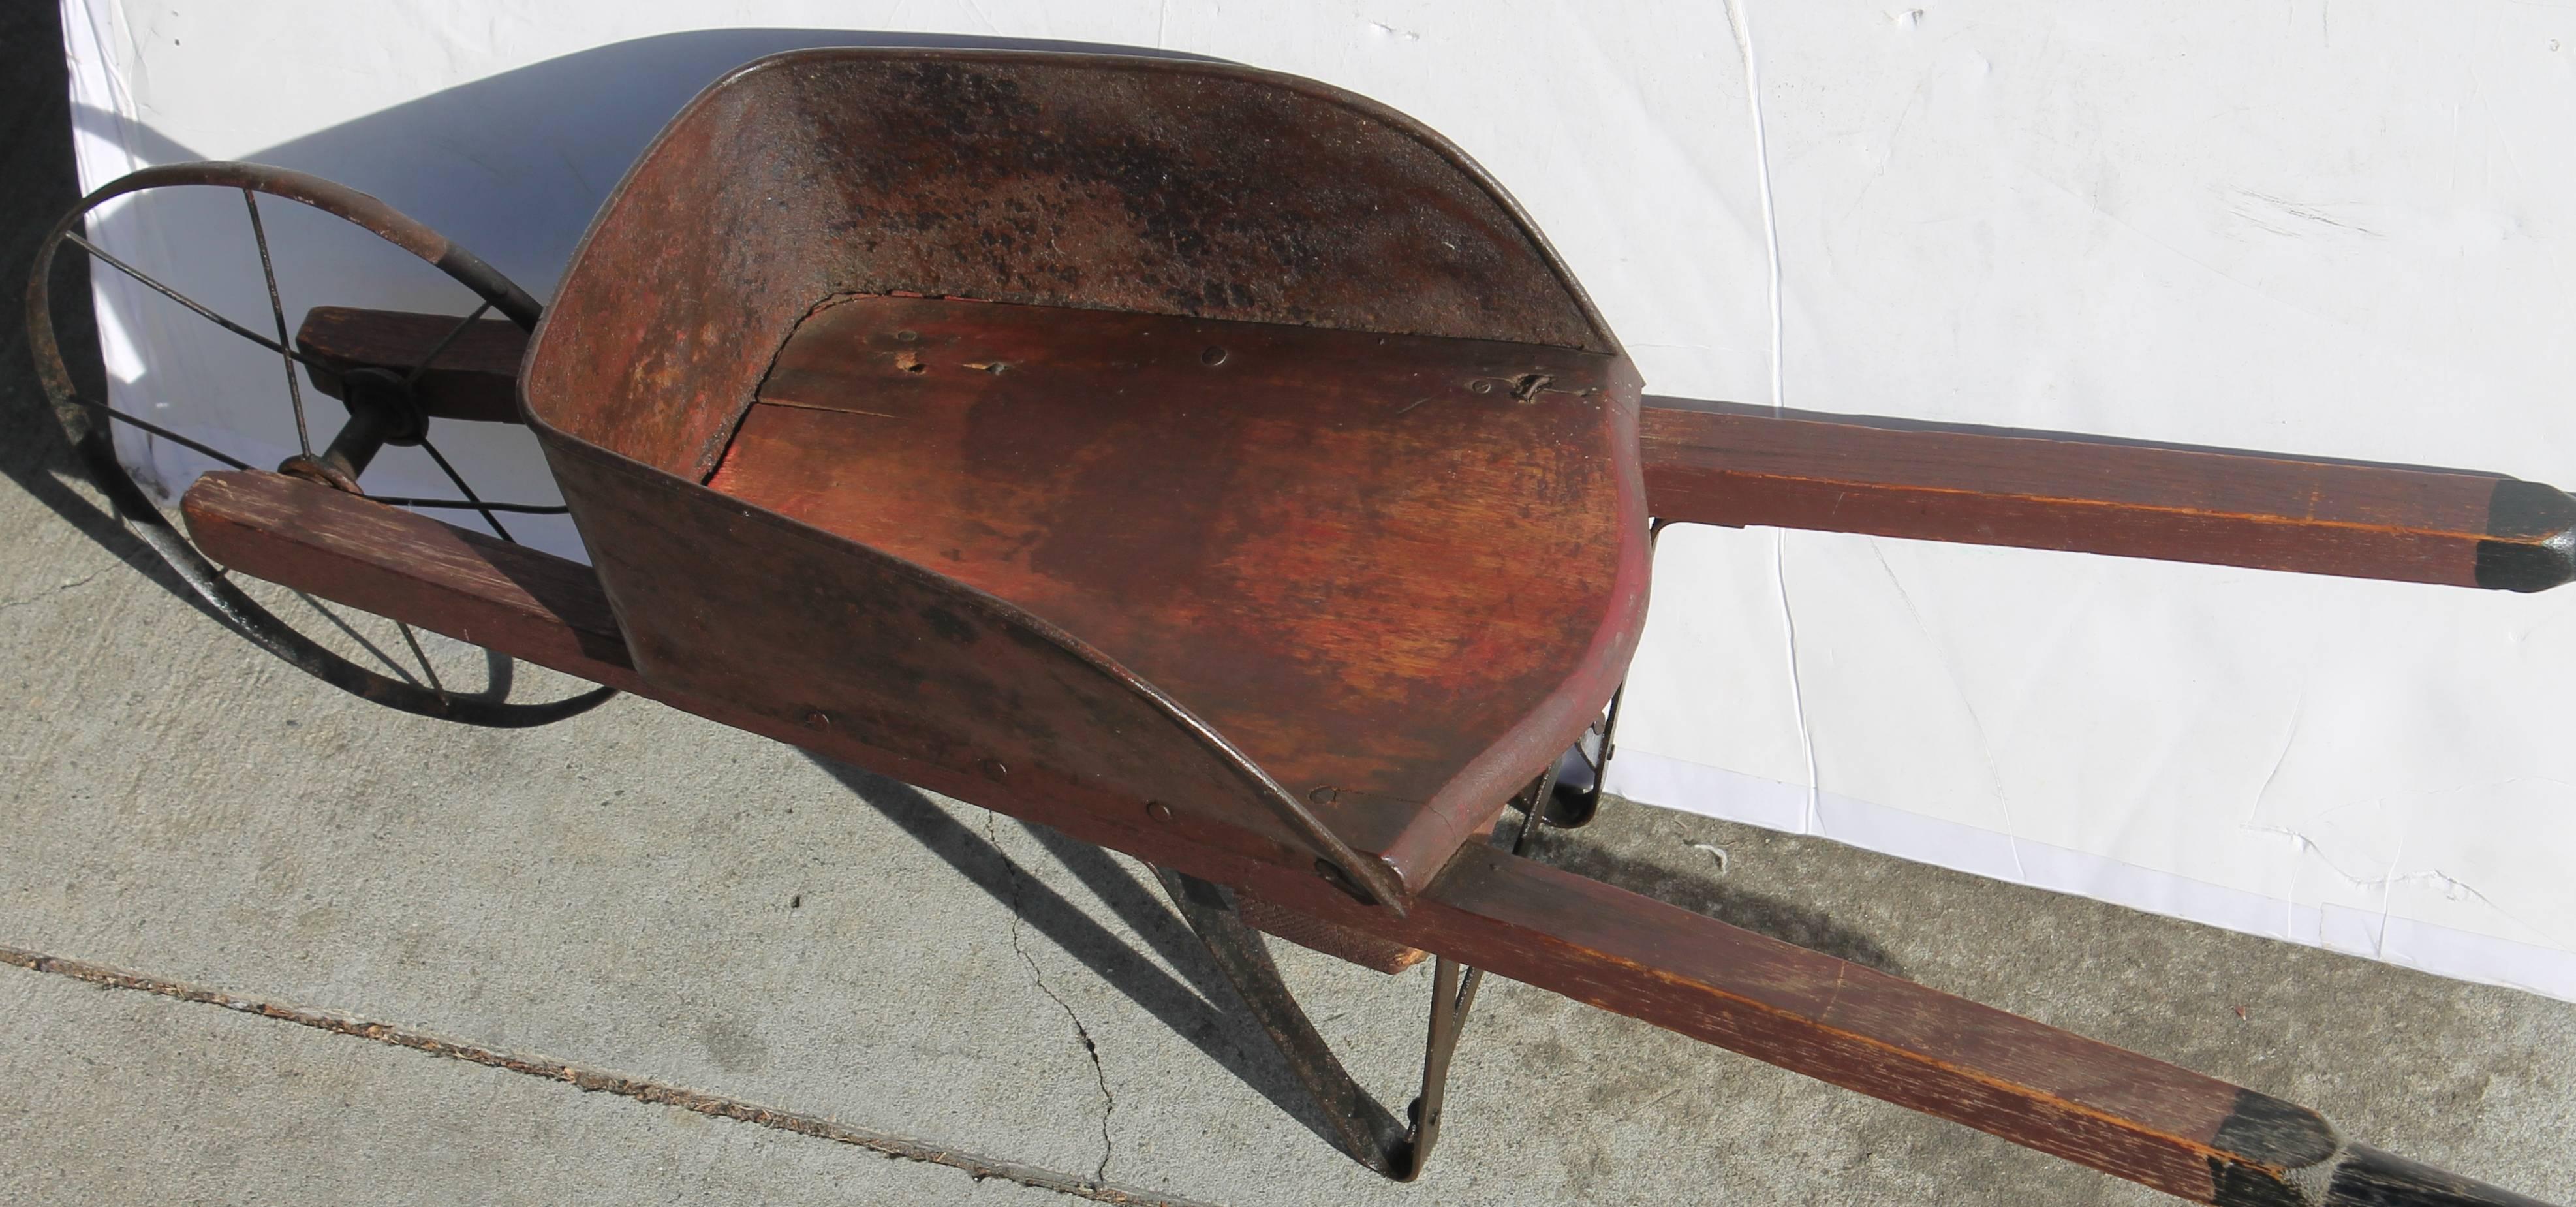 This original red painted metal children's wheel barrel has a wood insert and black and redwood painted handles. The tin and wire wheel is also original. This is a fully functional toy. Great for a teddy bear or Folk Art collection.